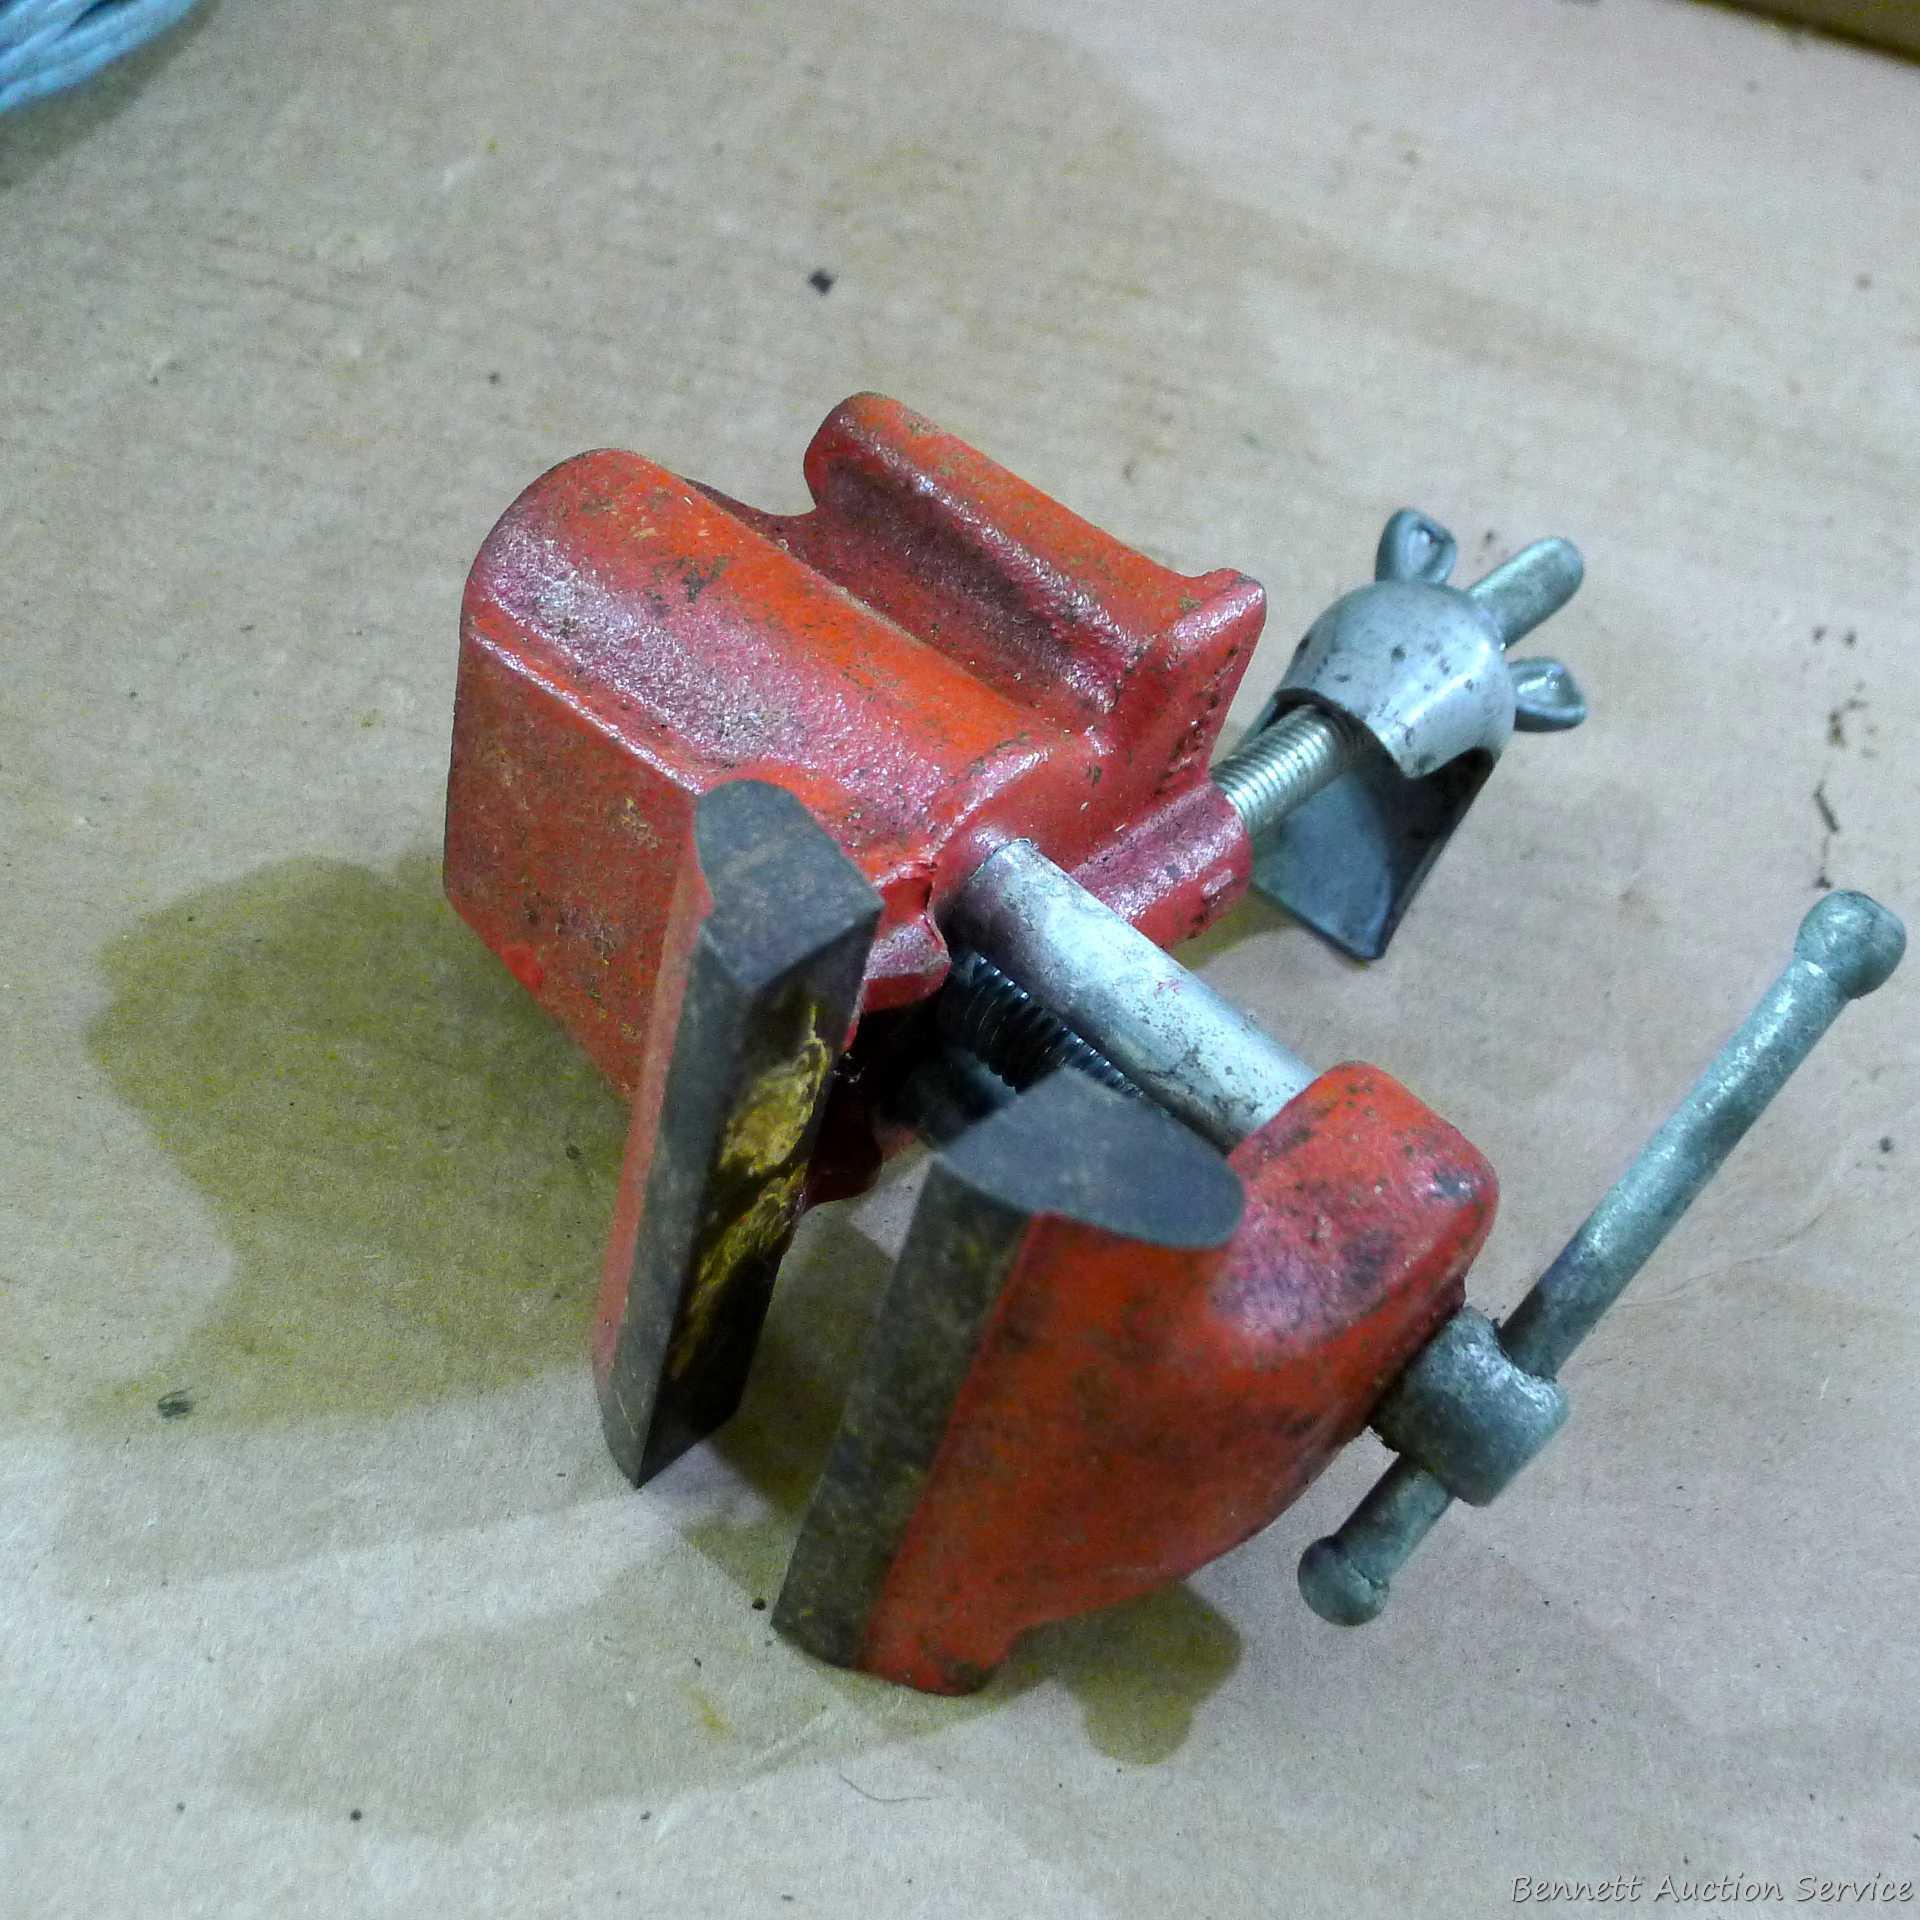 Bench vise with 3" jaws, tow strap with 5" hooks, glue gun, Atlas entry knob, more.